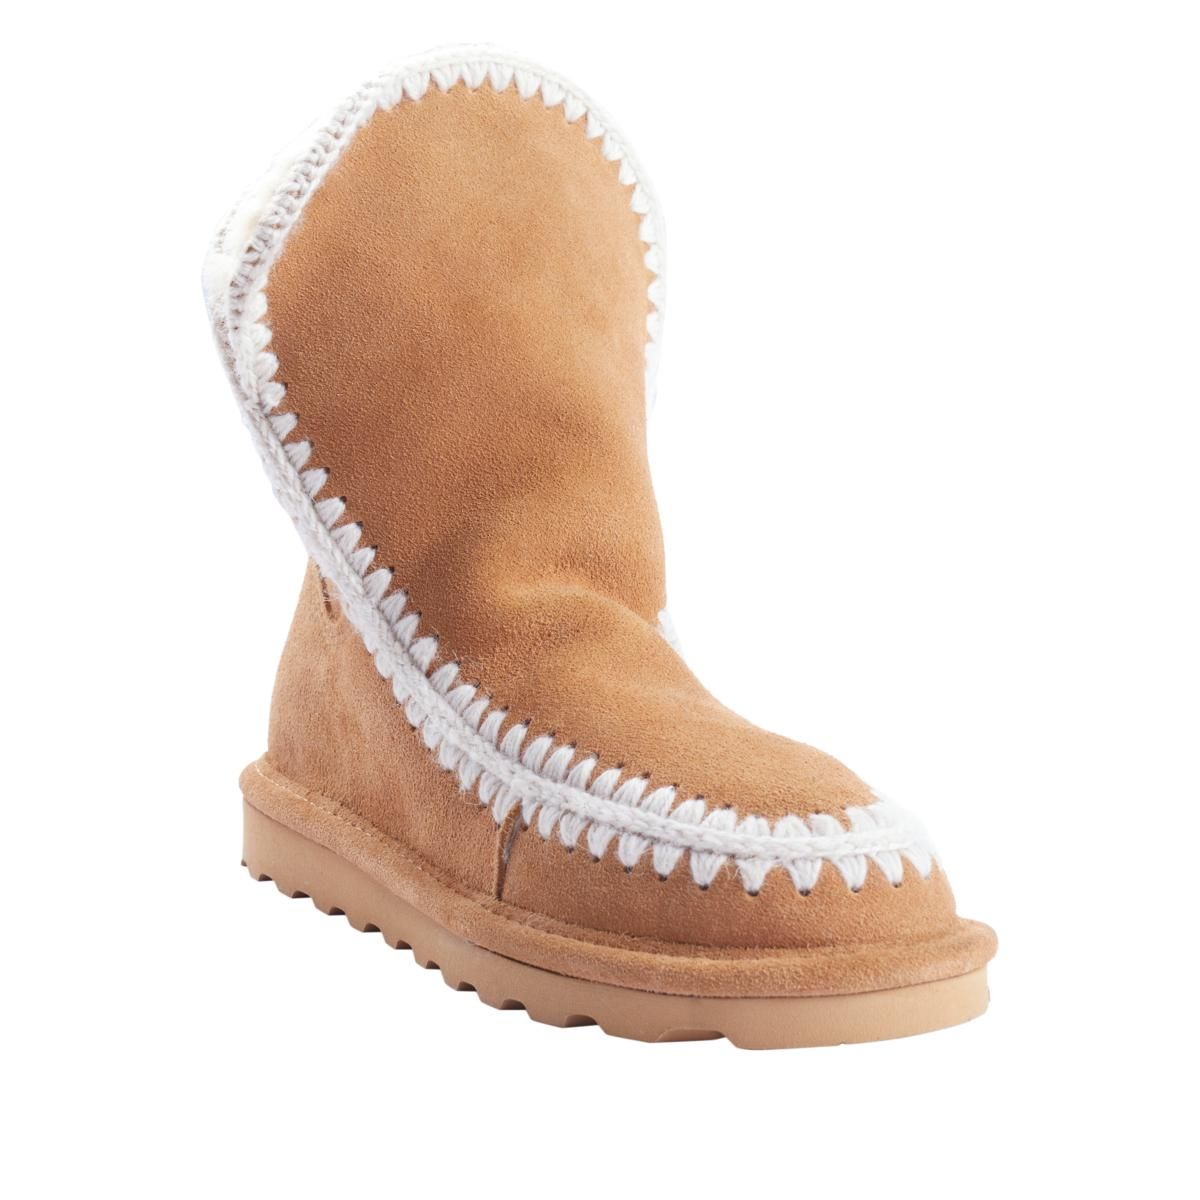 BEARPAW® Star Suede Boot with NeverWet® Technology - 20461926 | HSN | HSN